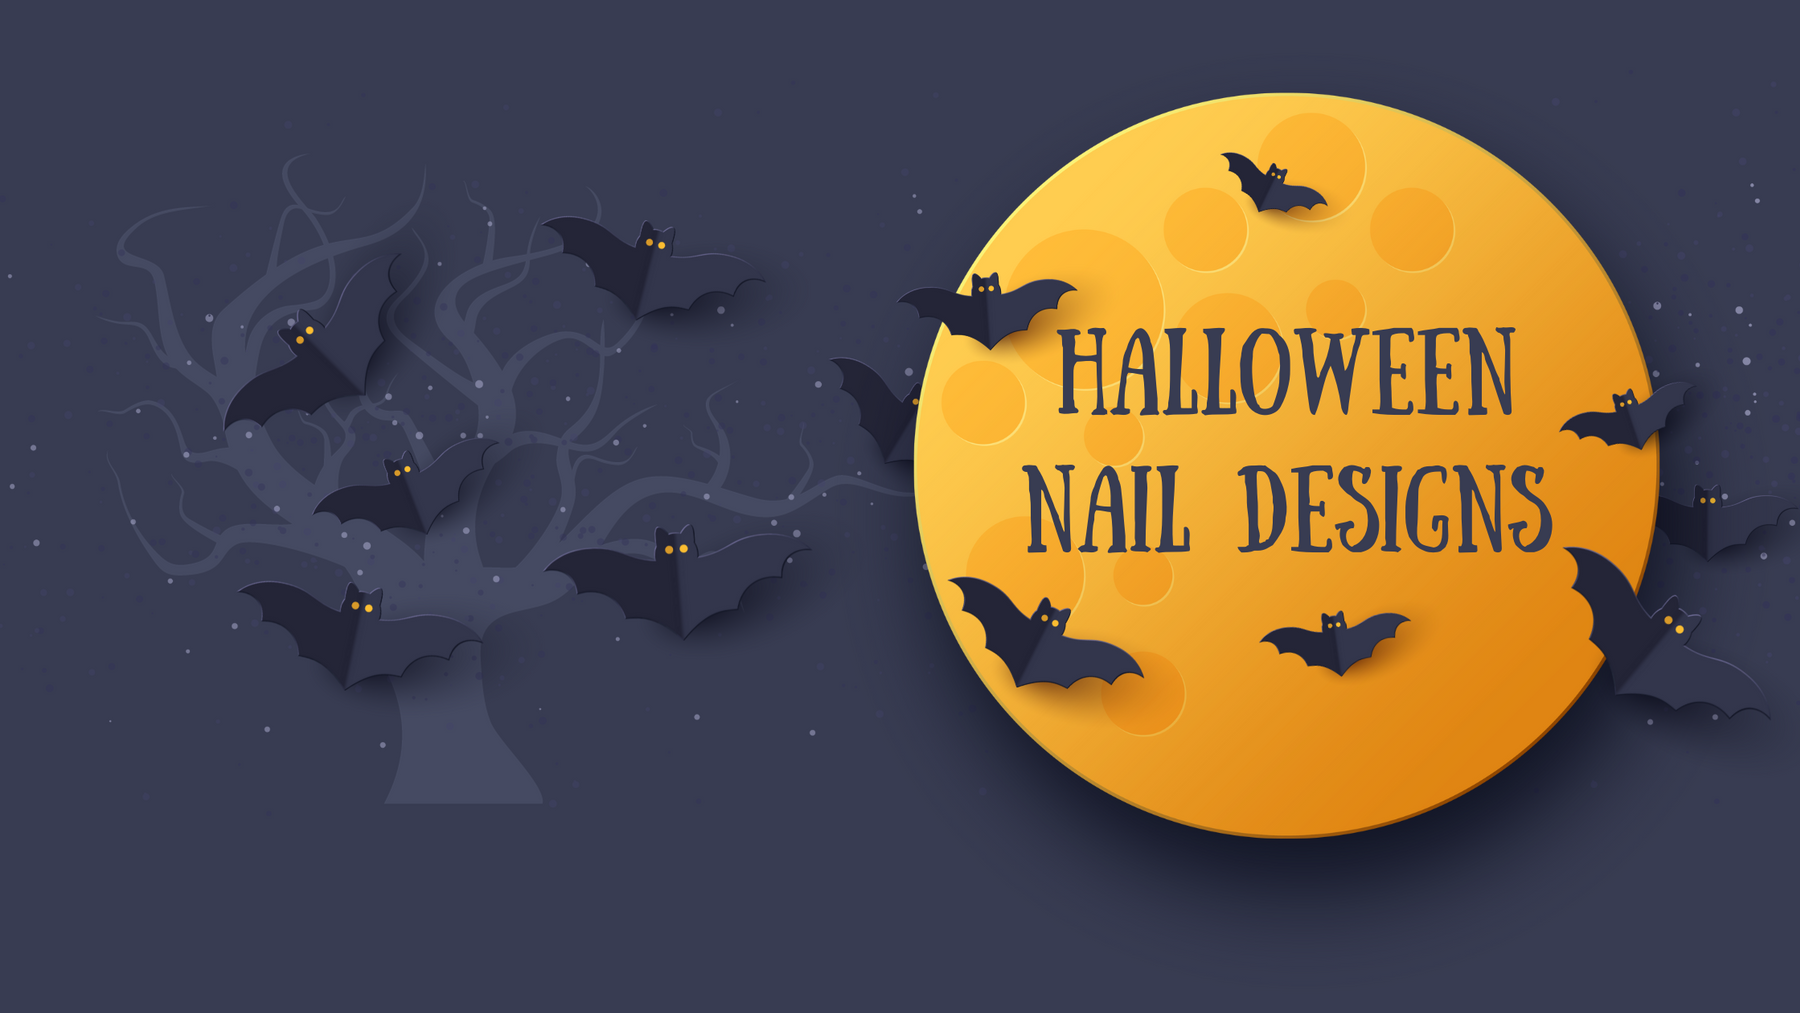 Get Spooked with These Halloween Nail Designs!